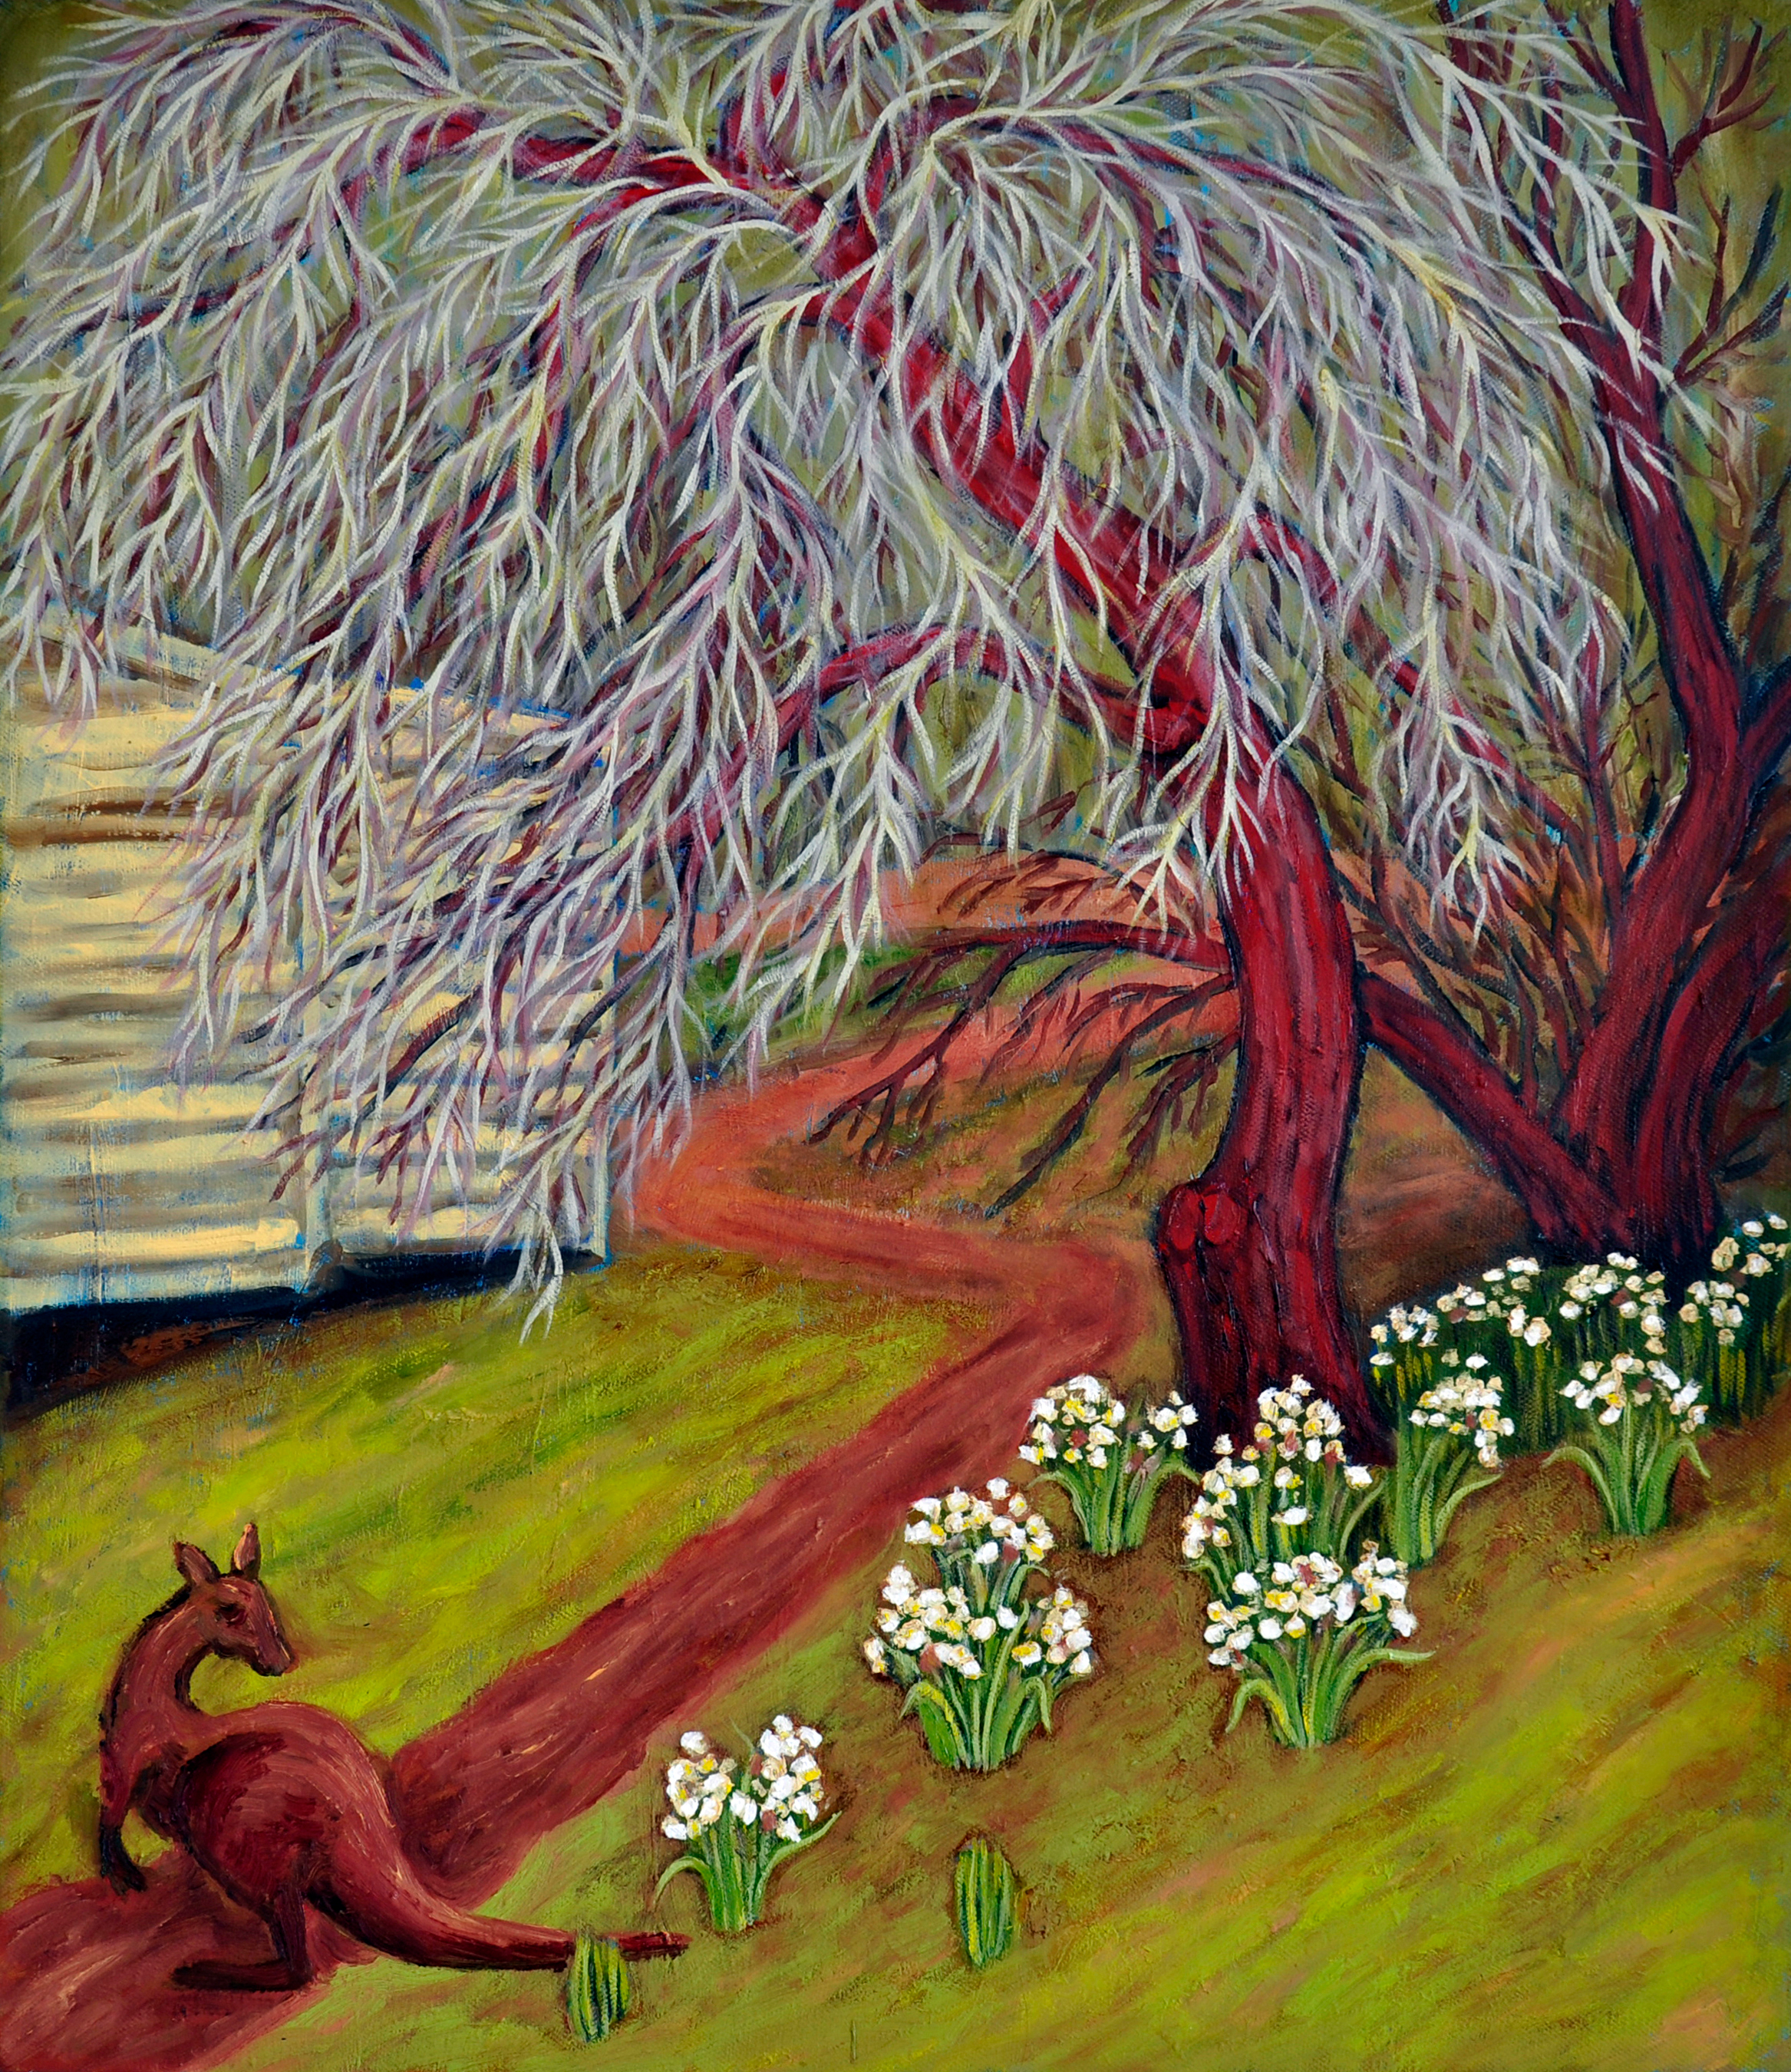 42. Robyn Varpins, A Cold Spring Morning $500